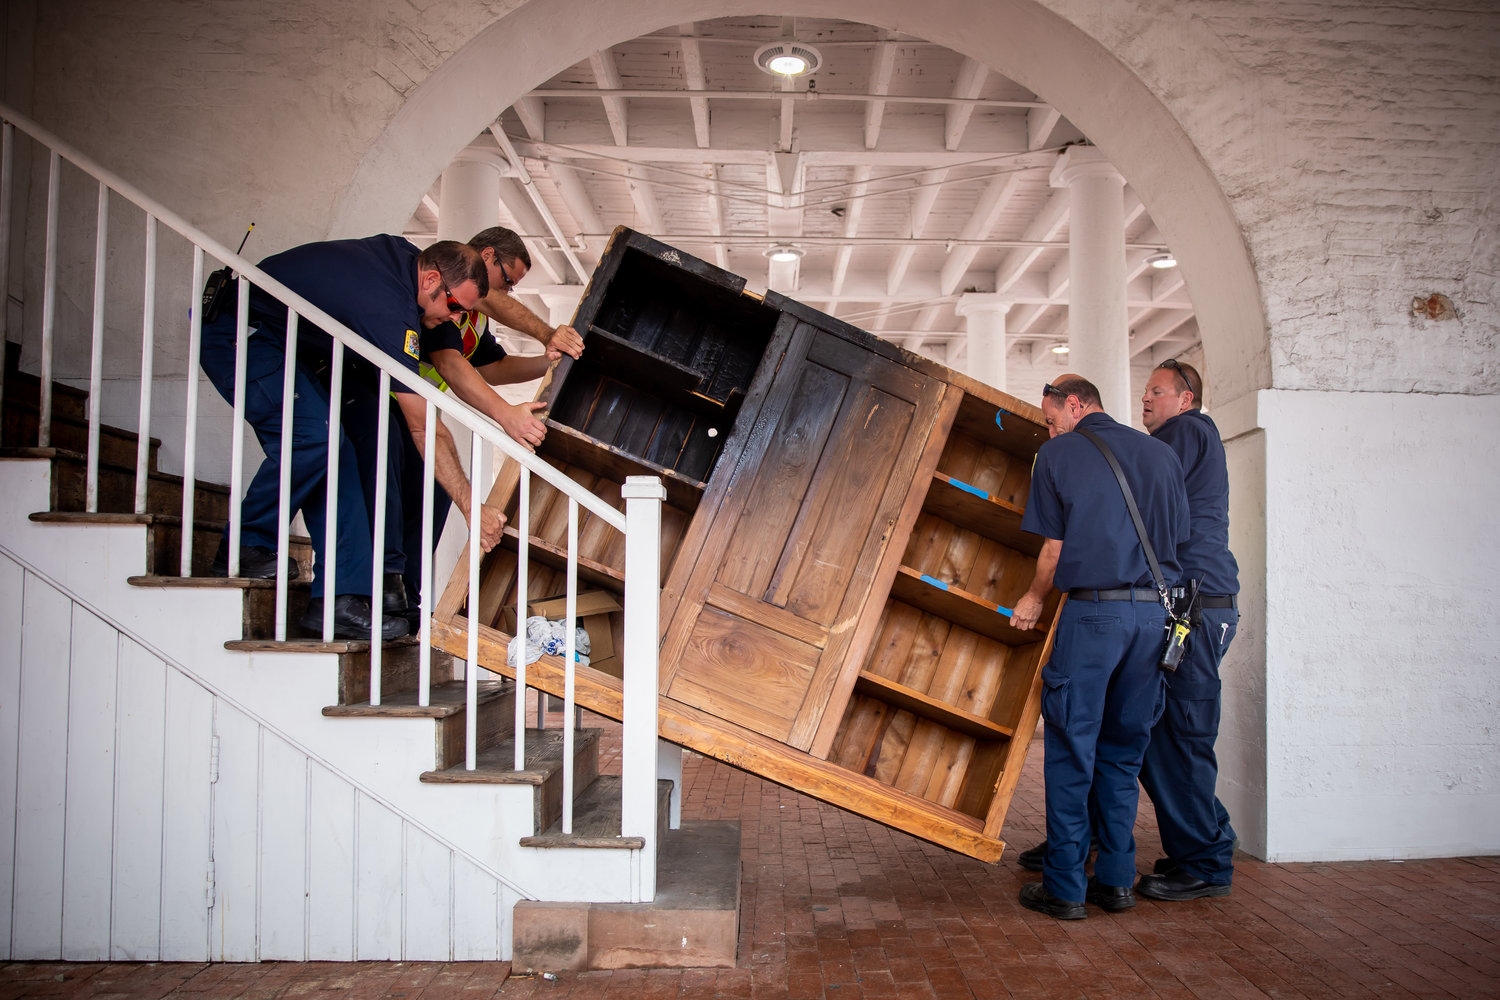 Members of the Fayetteville Fire Department help remove damaged furniture from the Market House on May 31, 2020.